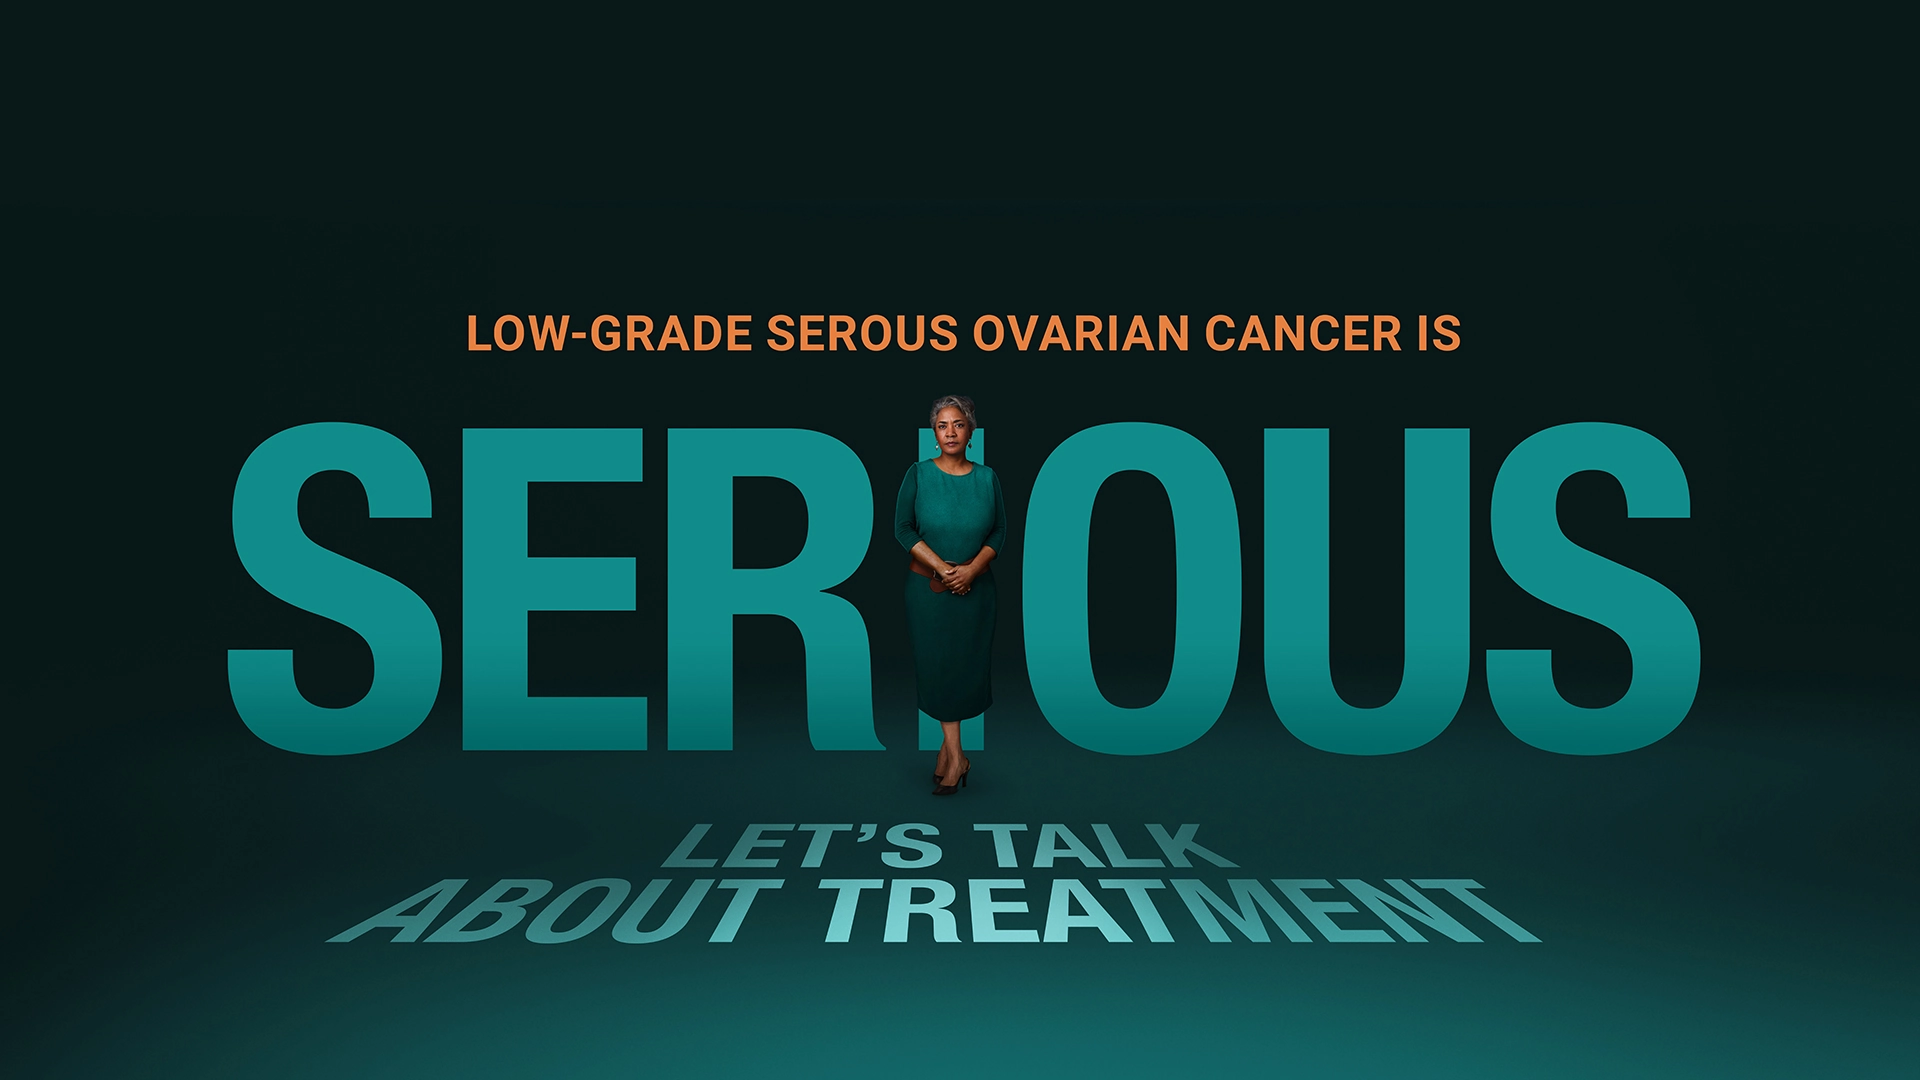 Low-grade serous ovarian cancer is serious